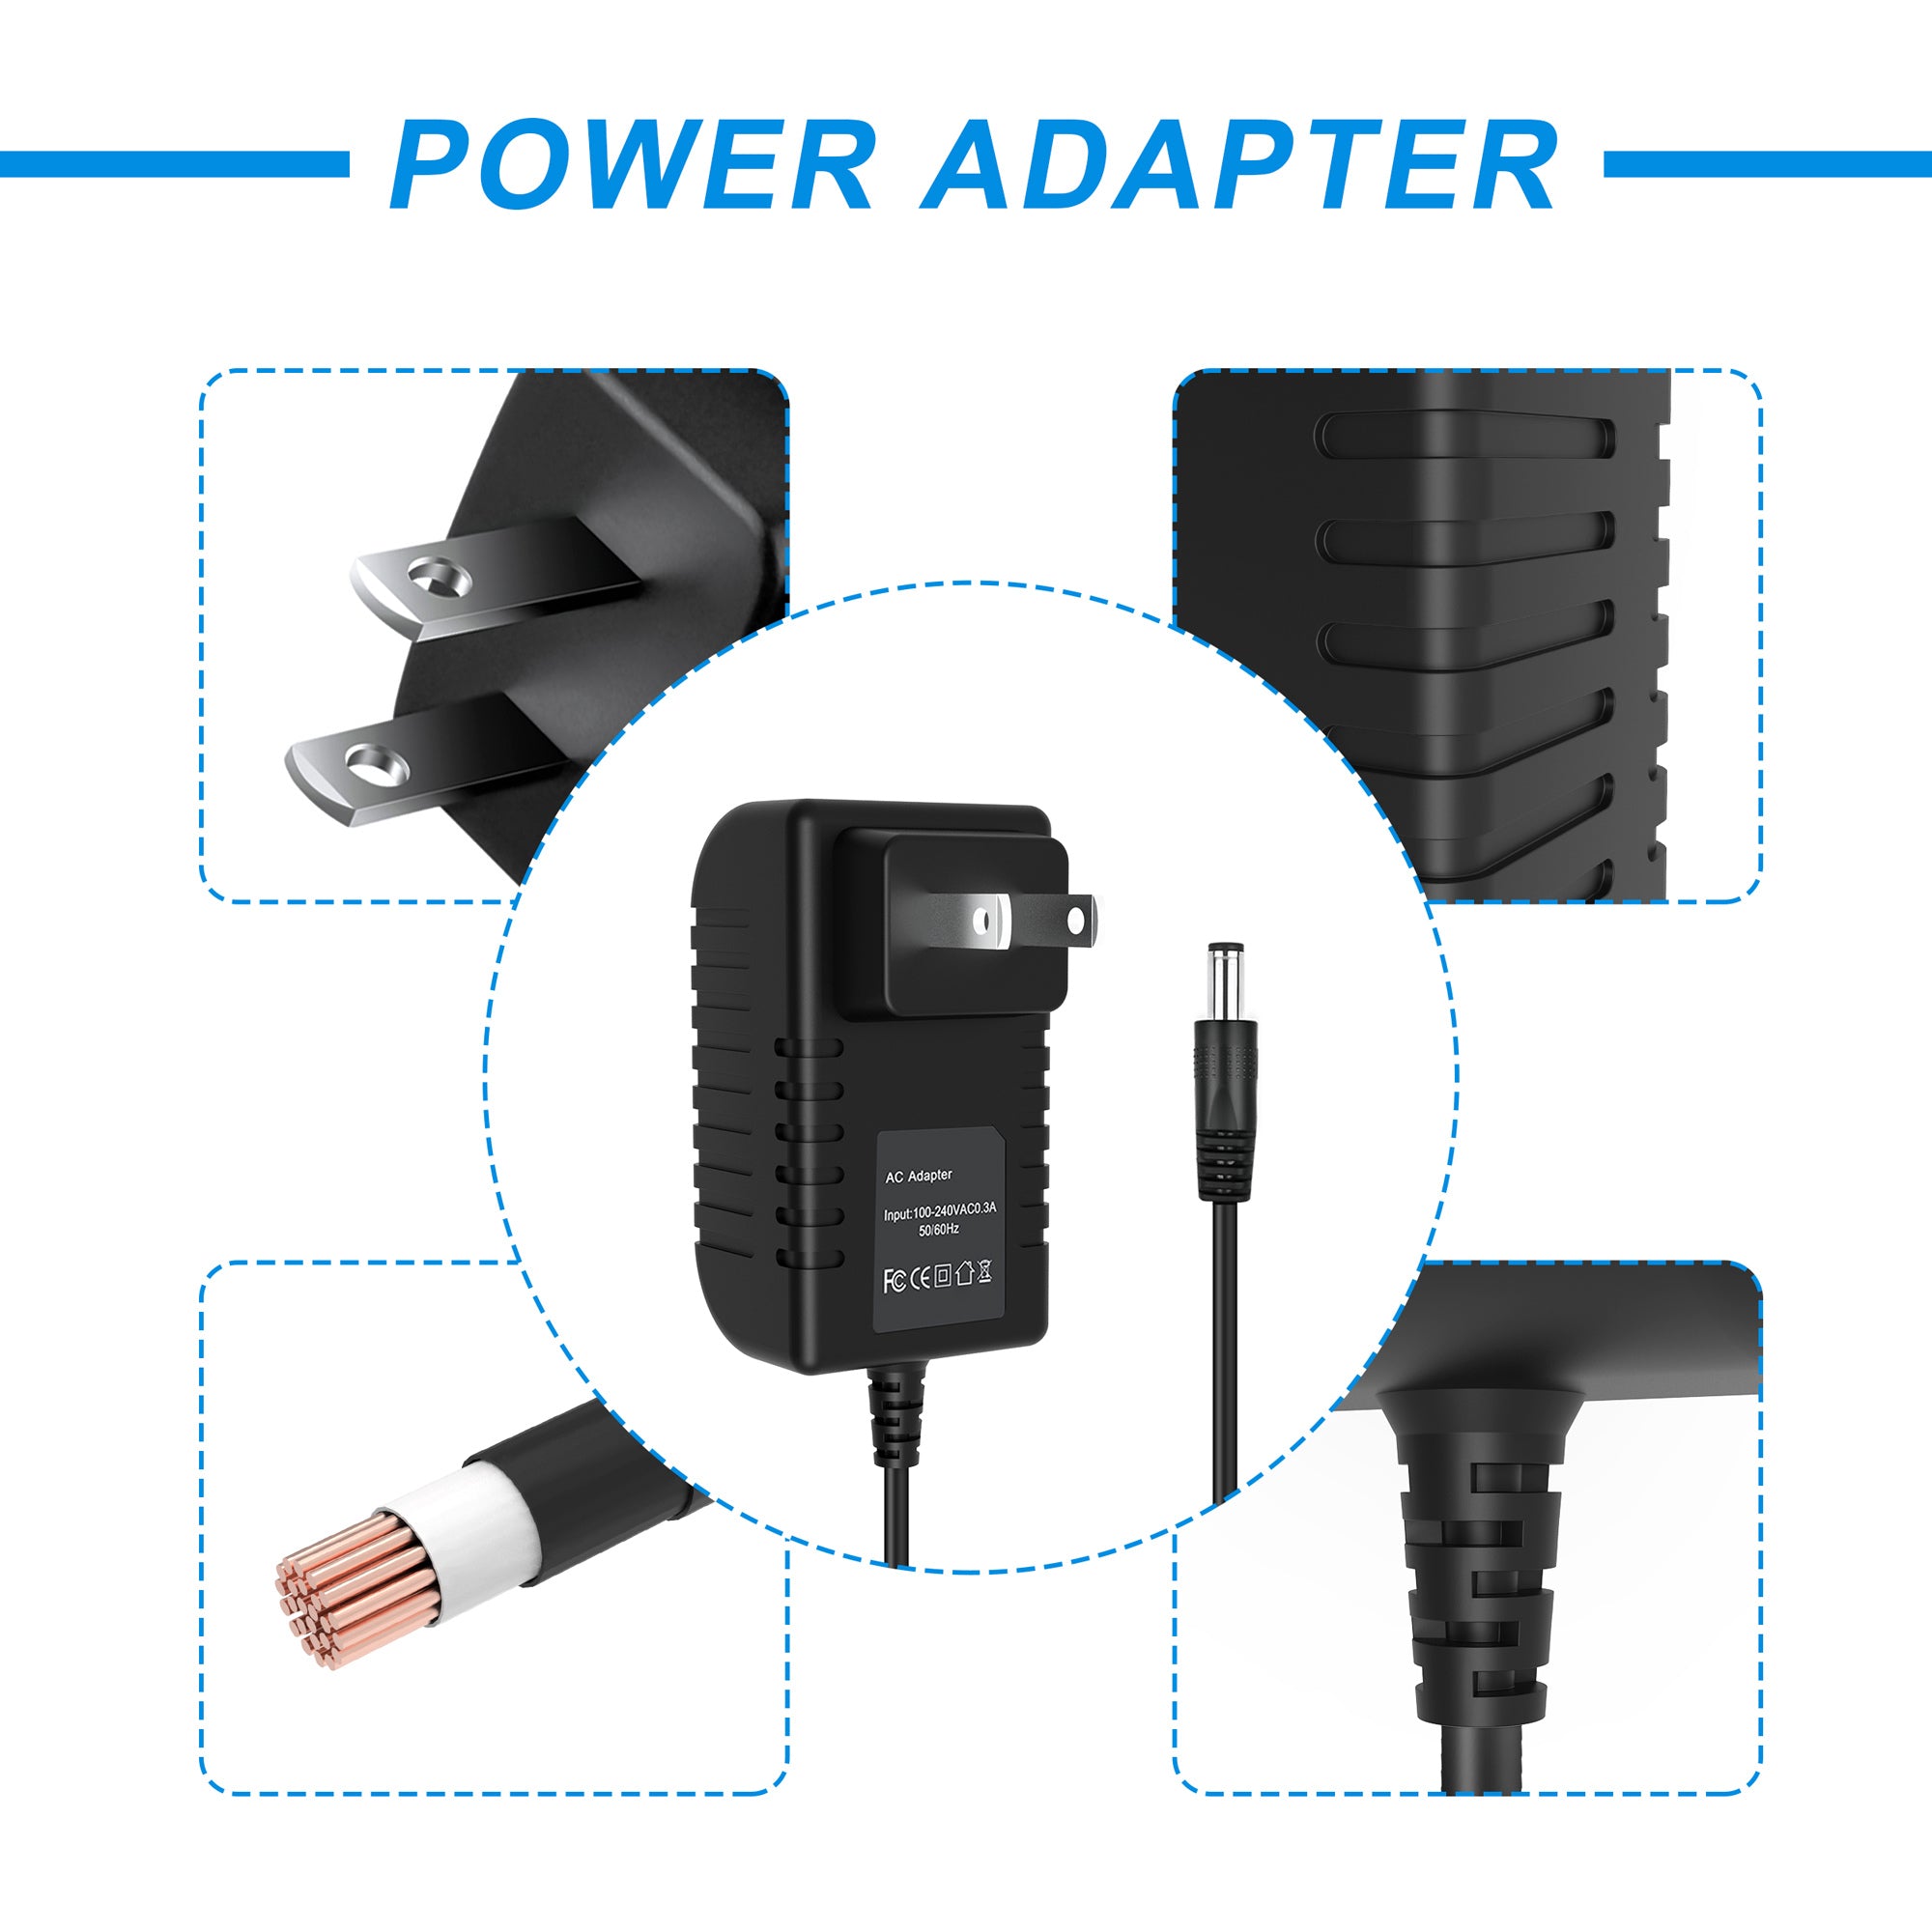 AbleGrid AC Adapter Compatible with PI P975HB1201 01210LF Switching Power Supply Cord Cable Charger